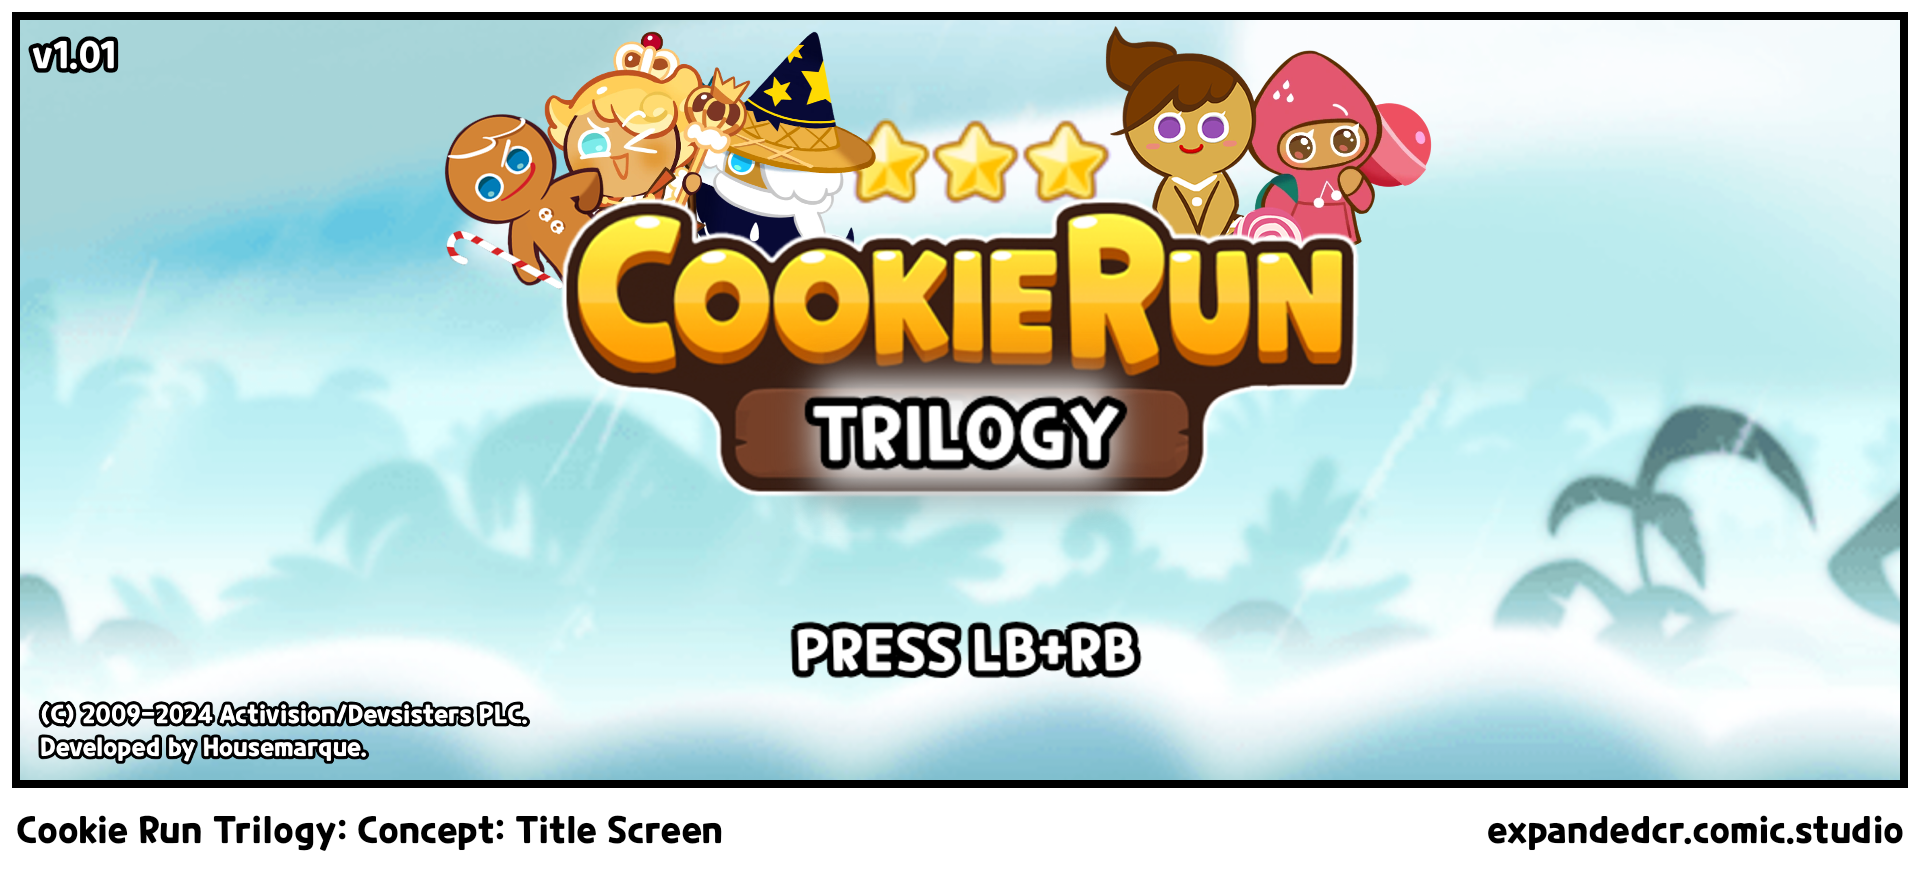 Cookie Run Trilogy: Concept: Title Screen